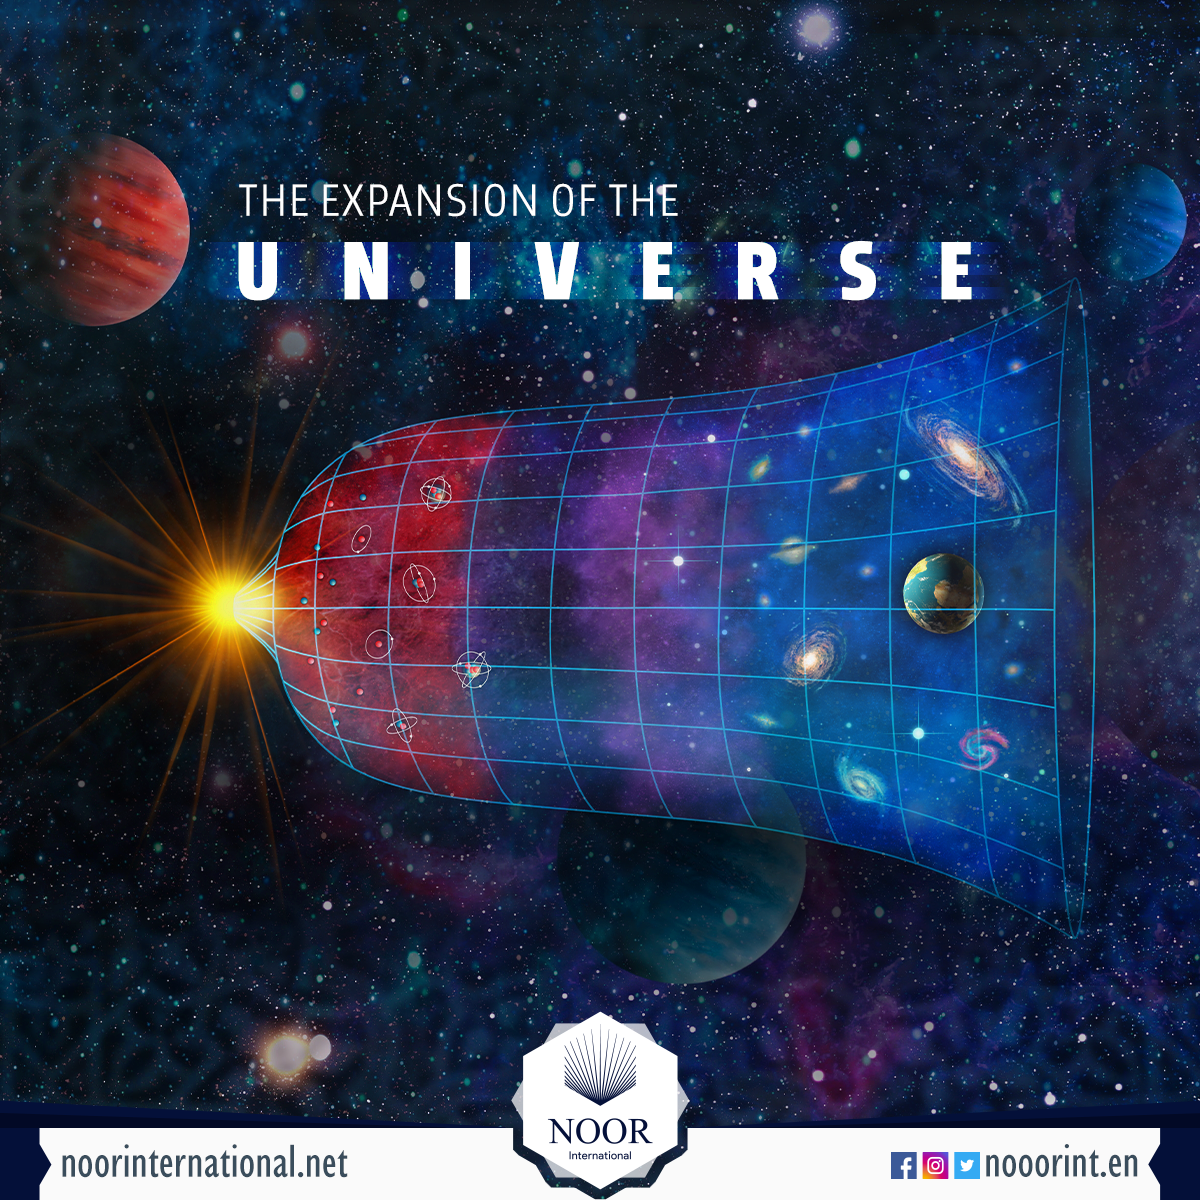 The Expansion of the universe